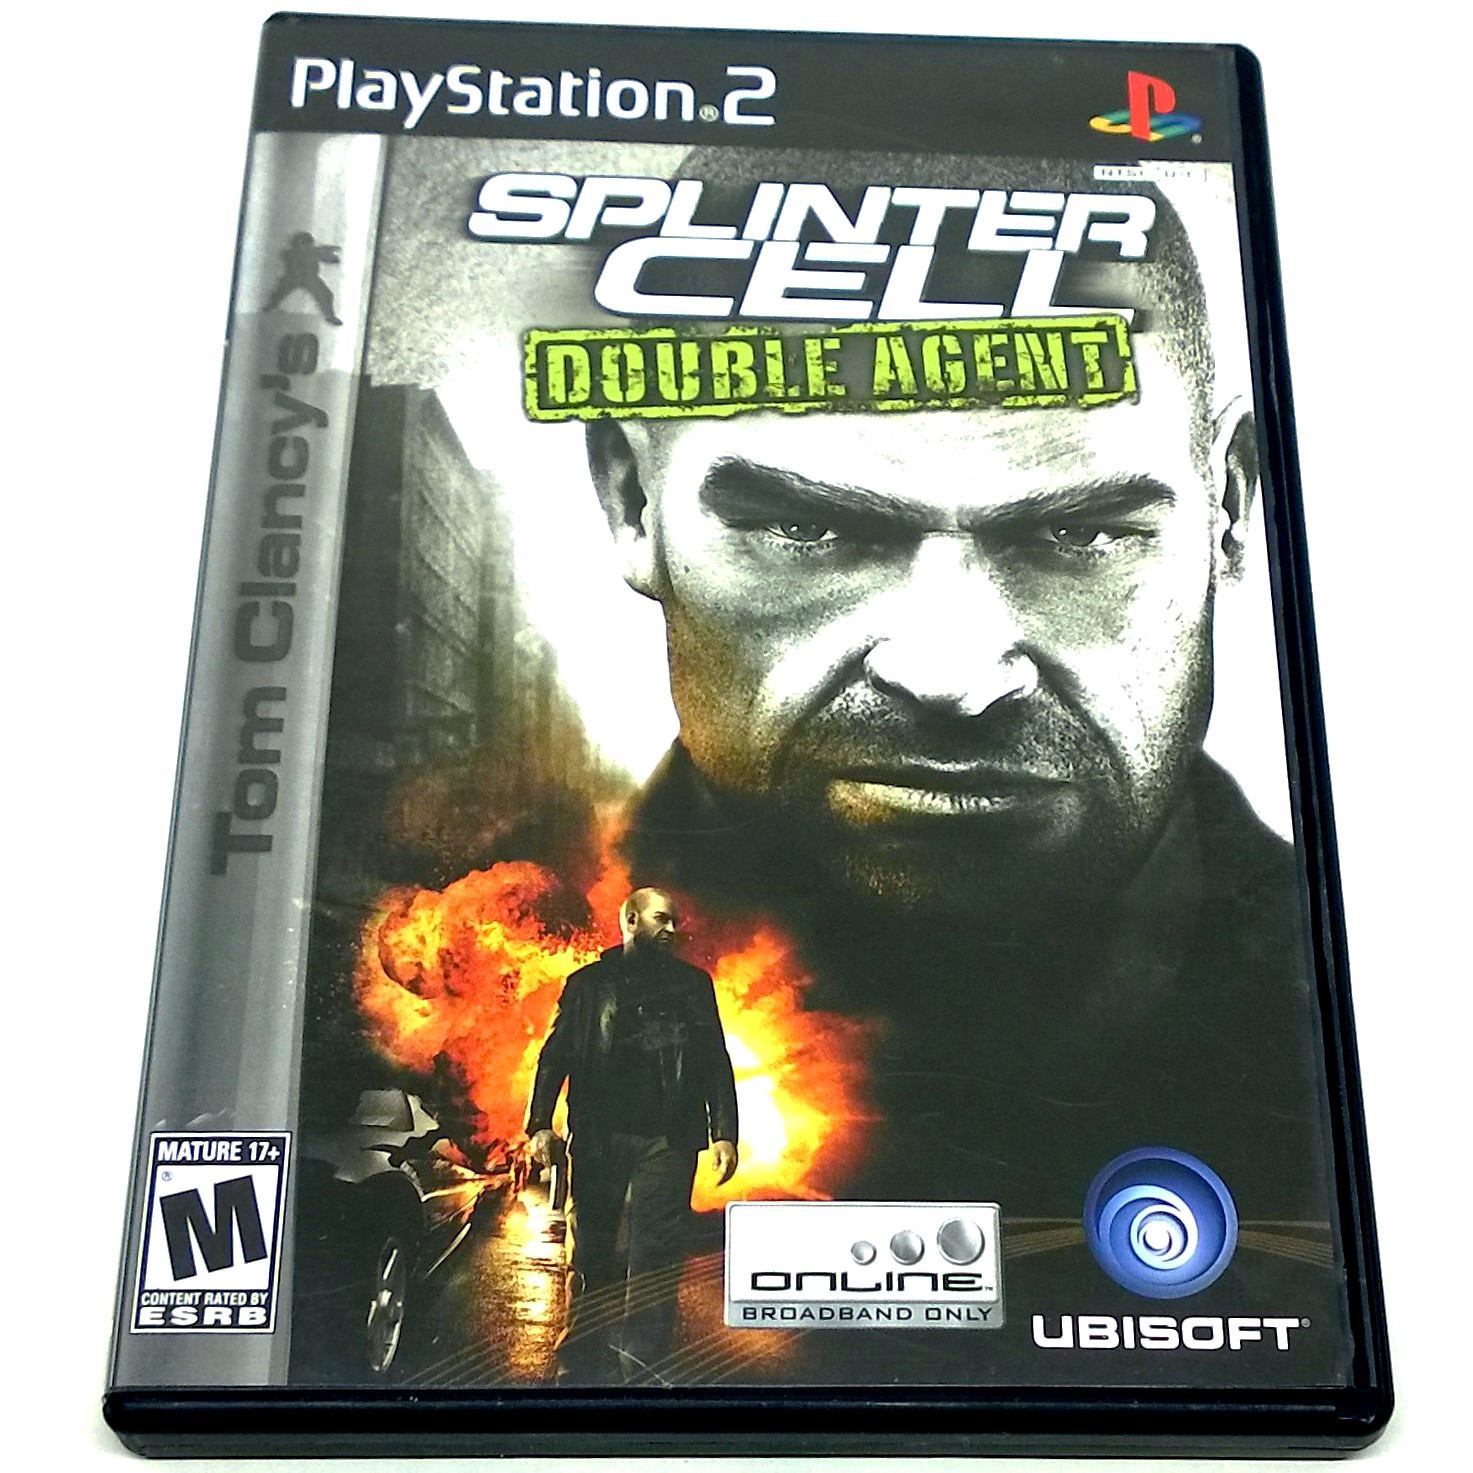 Tom Clancy's Splinter Cell: Double Agent for PlayStation 2 - Front of case